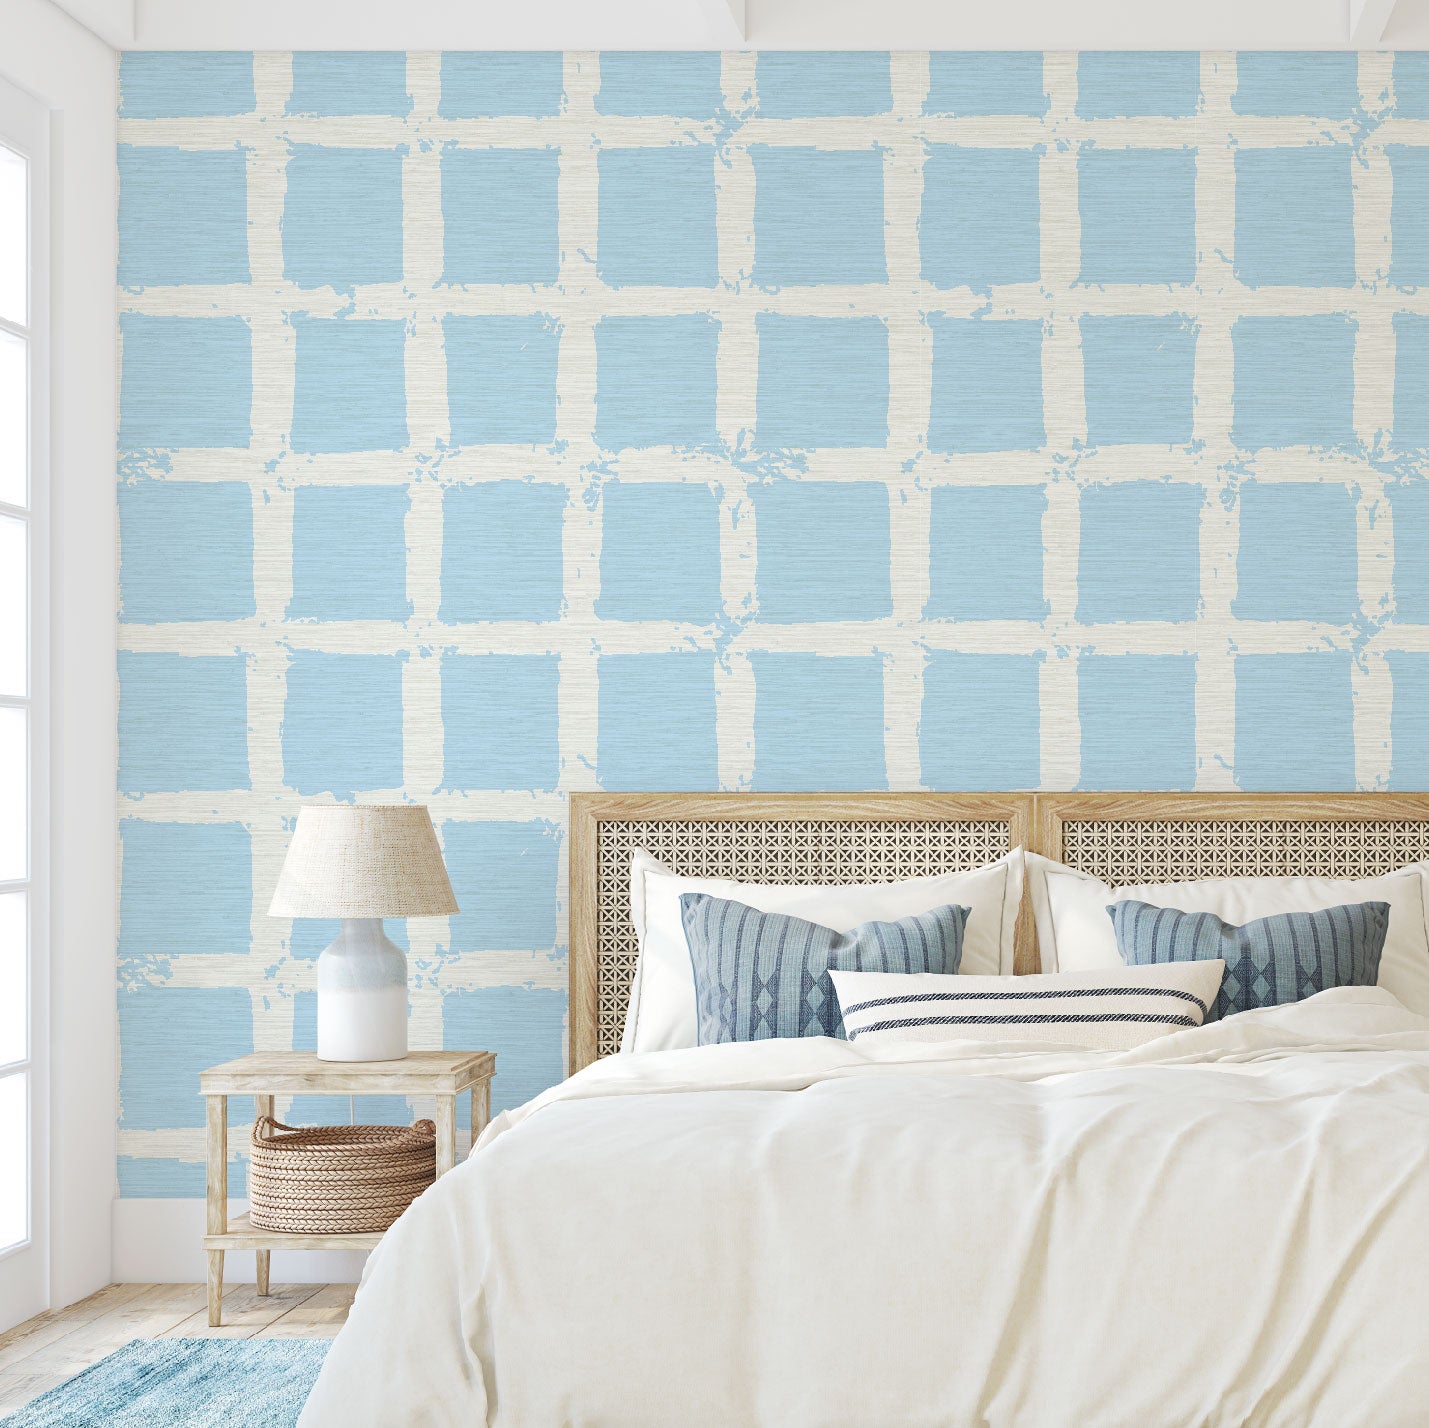 Load image into Gallery viewer, Bedroom with grasscloth wallpaper in hand painted square pattern emulating window panes in an oversized plaid layout with a french blue base on cream print
